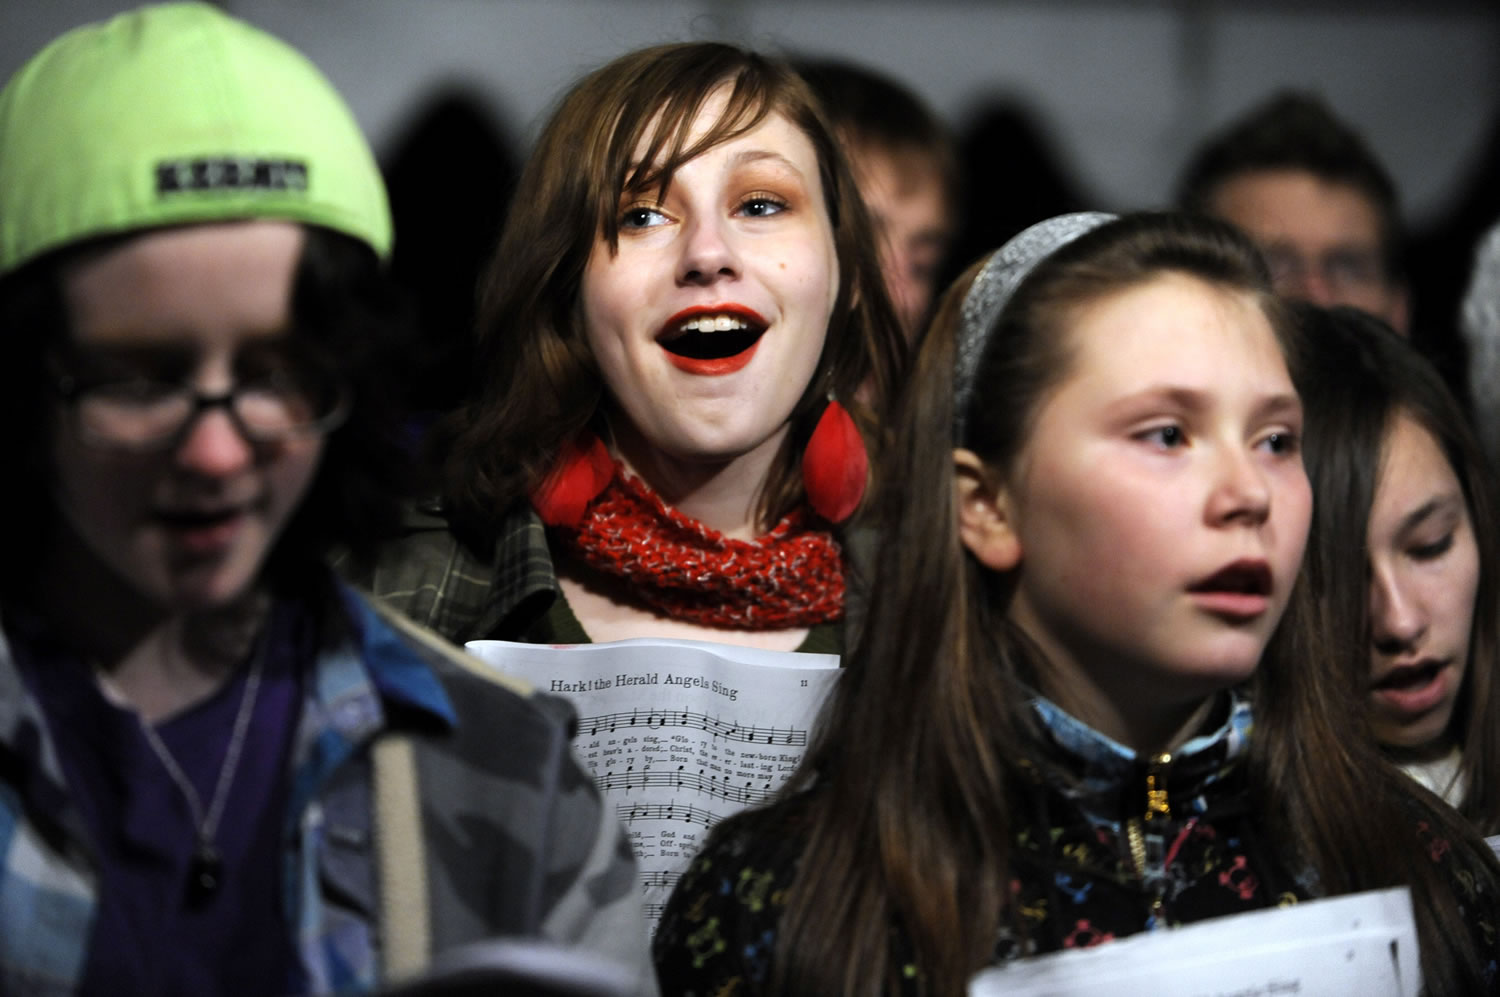 Laura Hoekstra, center, sings carols with the Vancouver Schools Choir prior to the 2011 Christmas tree lighting at Esther Short Park.